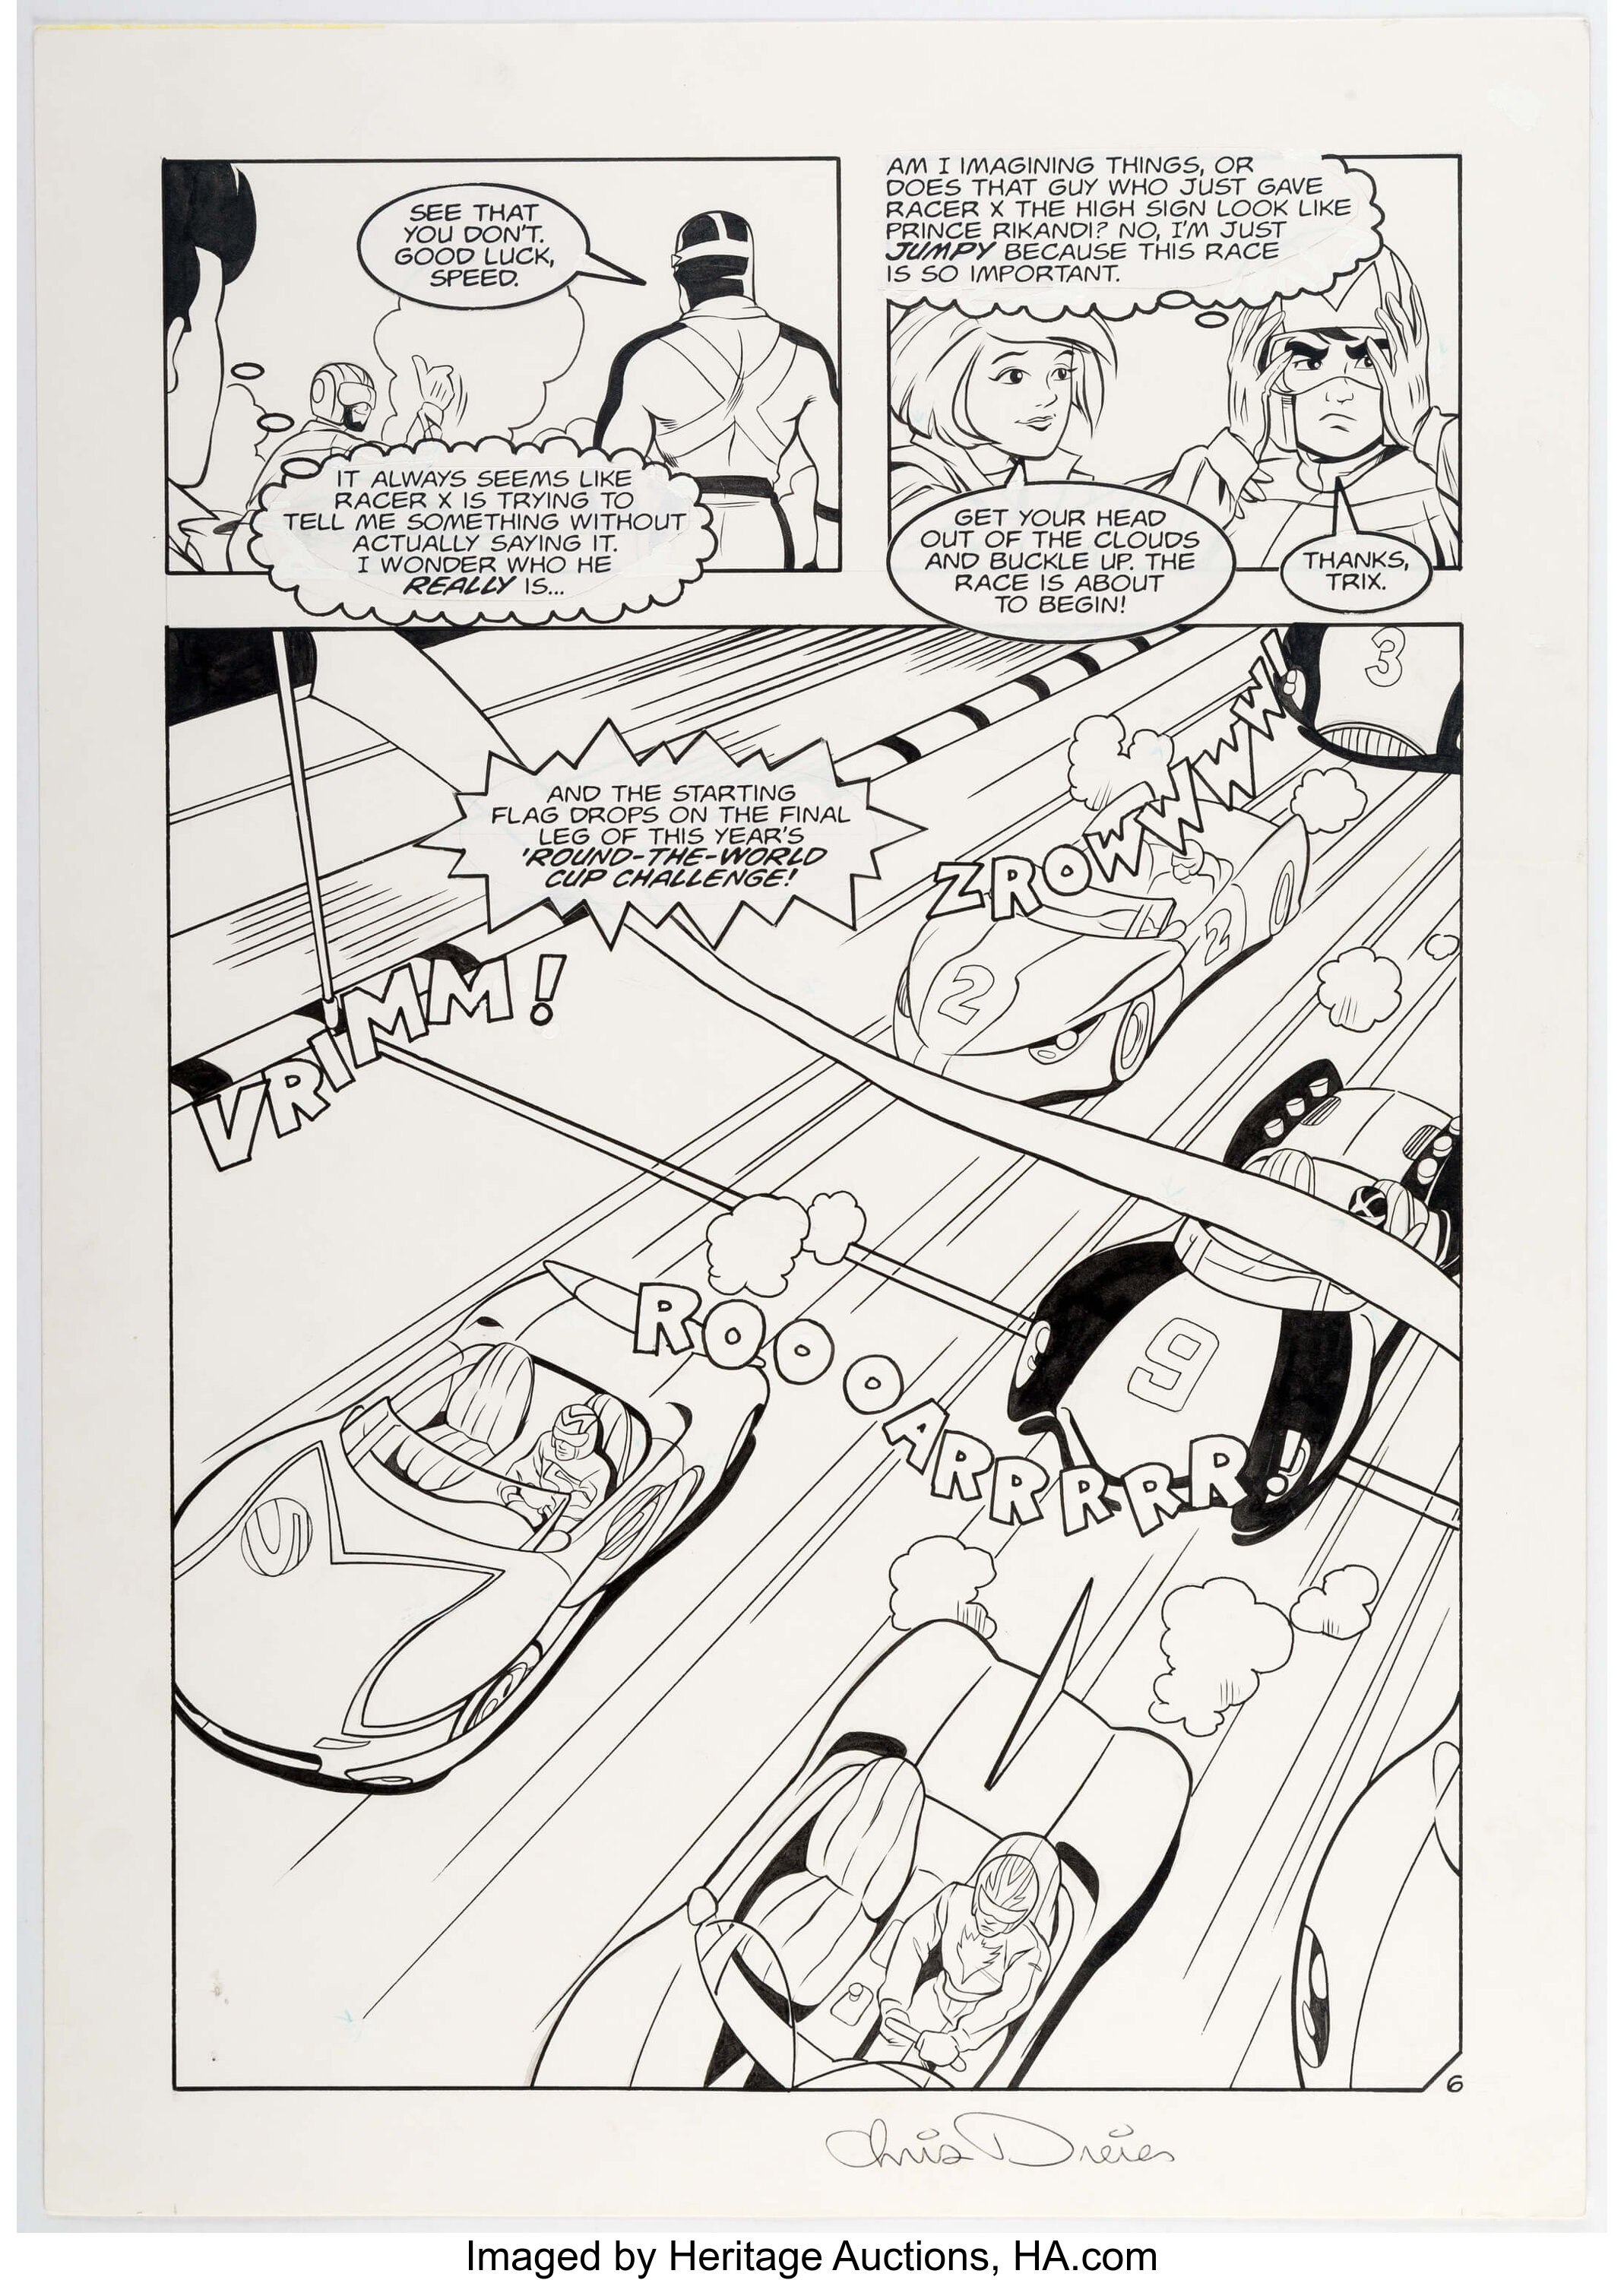 Chris Dreier The New Adventures of Speed Racer Story Page 6, Lot #15049